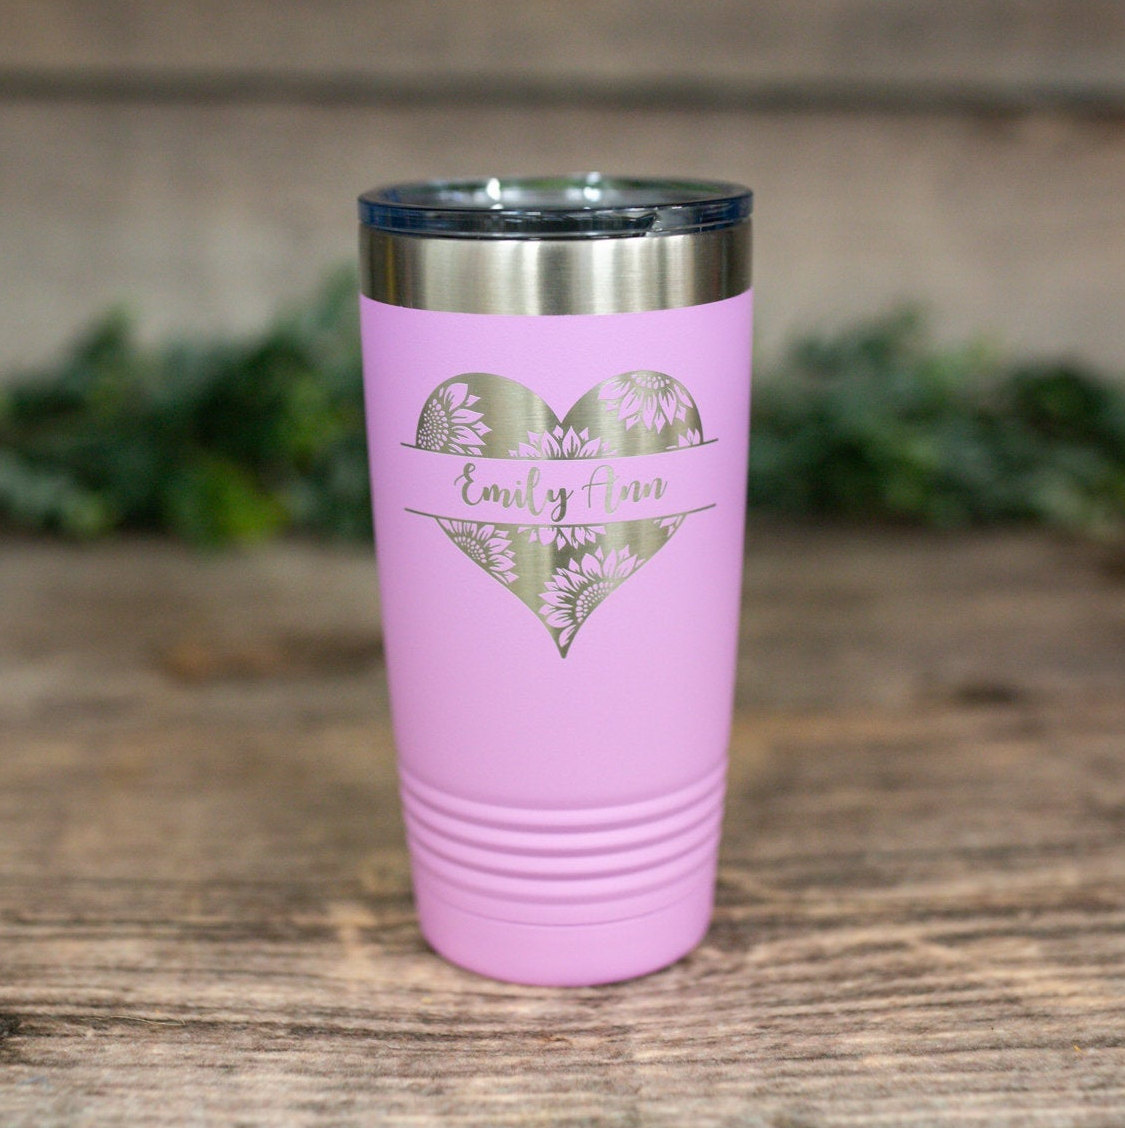 https://3cetching.com/wp-content/uploads/2021/07/personal-name-sunflower-heart-engraved-stainless-steel-sunflower-tumbler-insulated-travel-mug-cute-gift-for-her-60f72a92.jpg